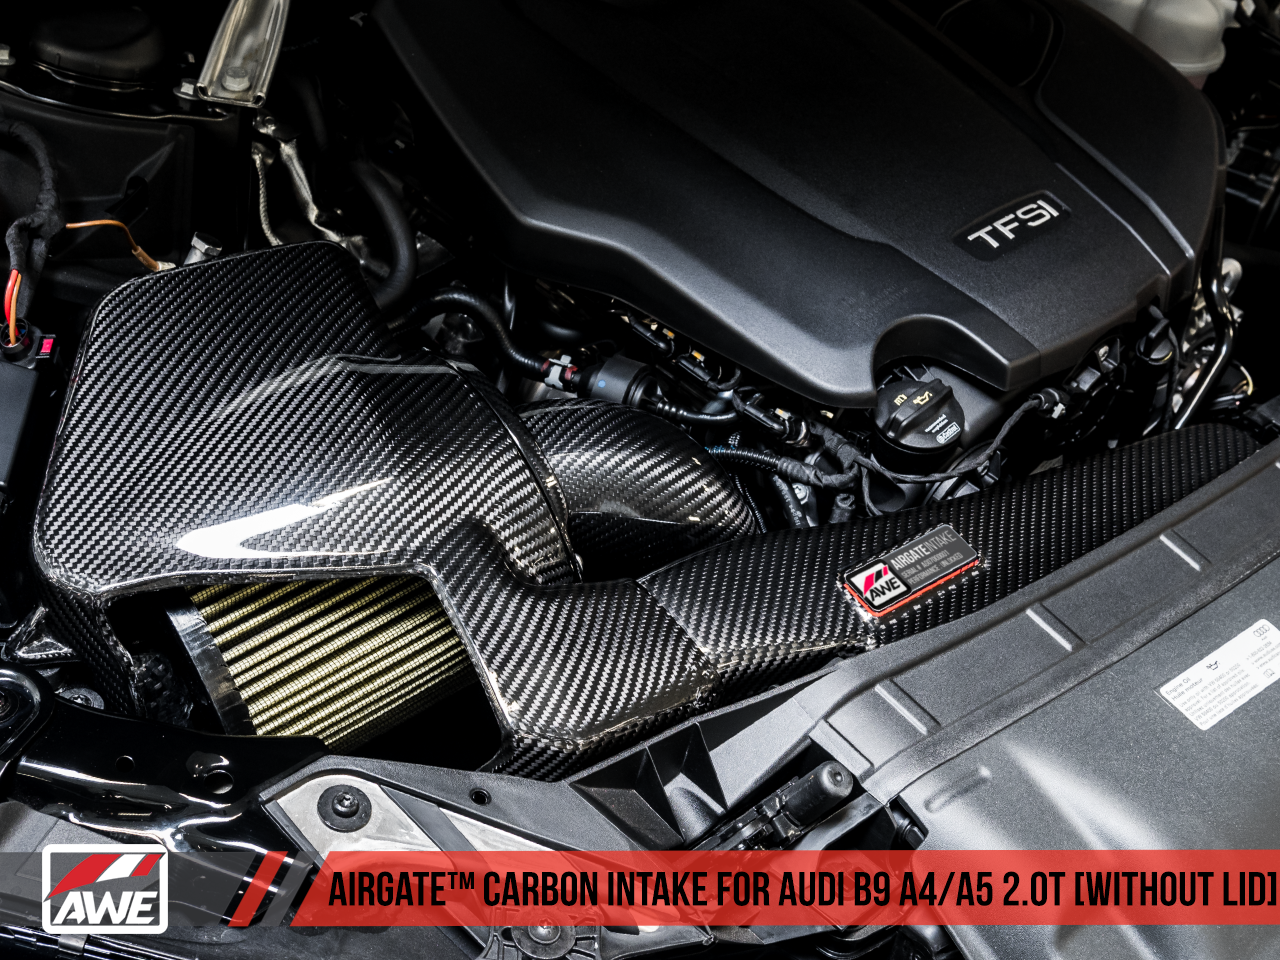 AWE AirGate™ Carbon Fiber Intake for Audi B9 A4 / A5 2.0T - Without Lid